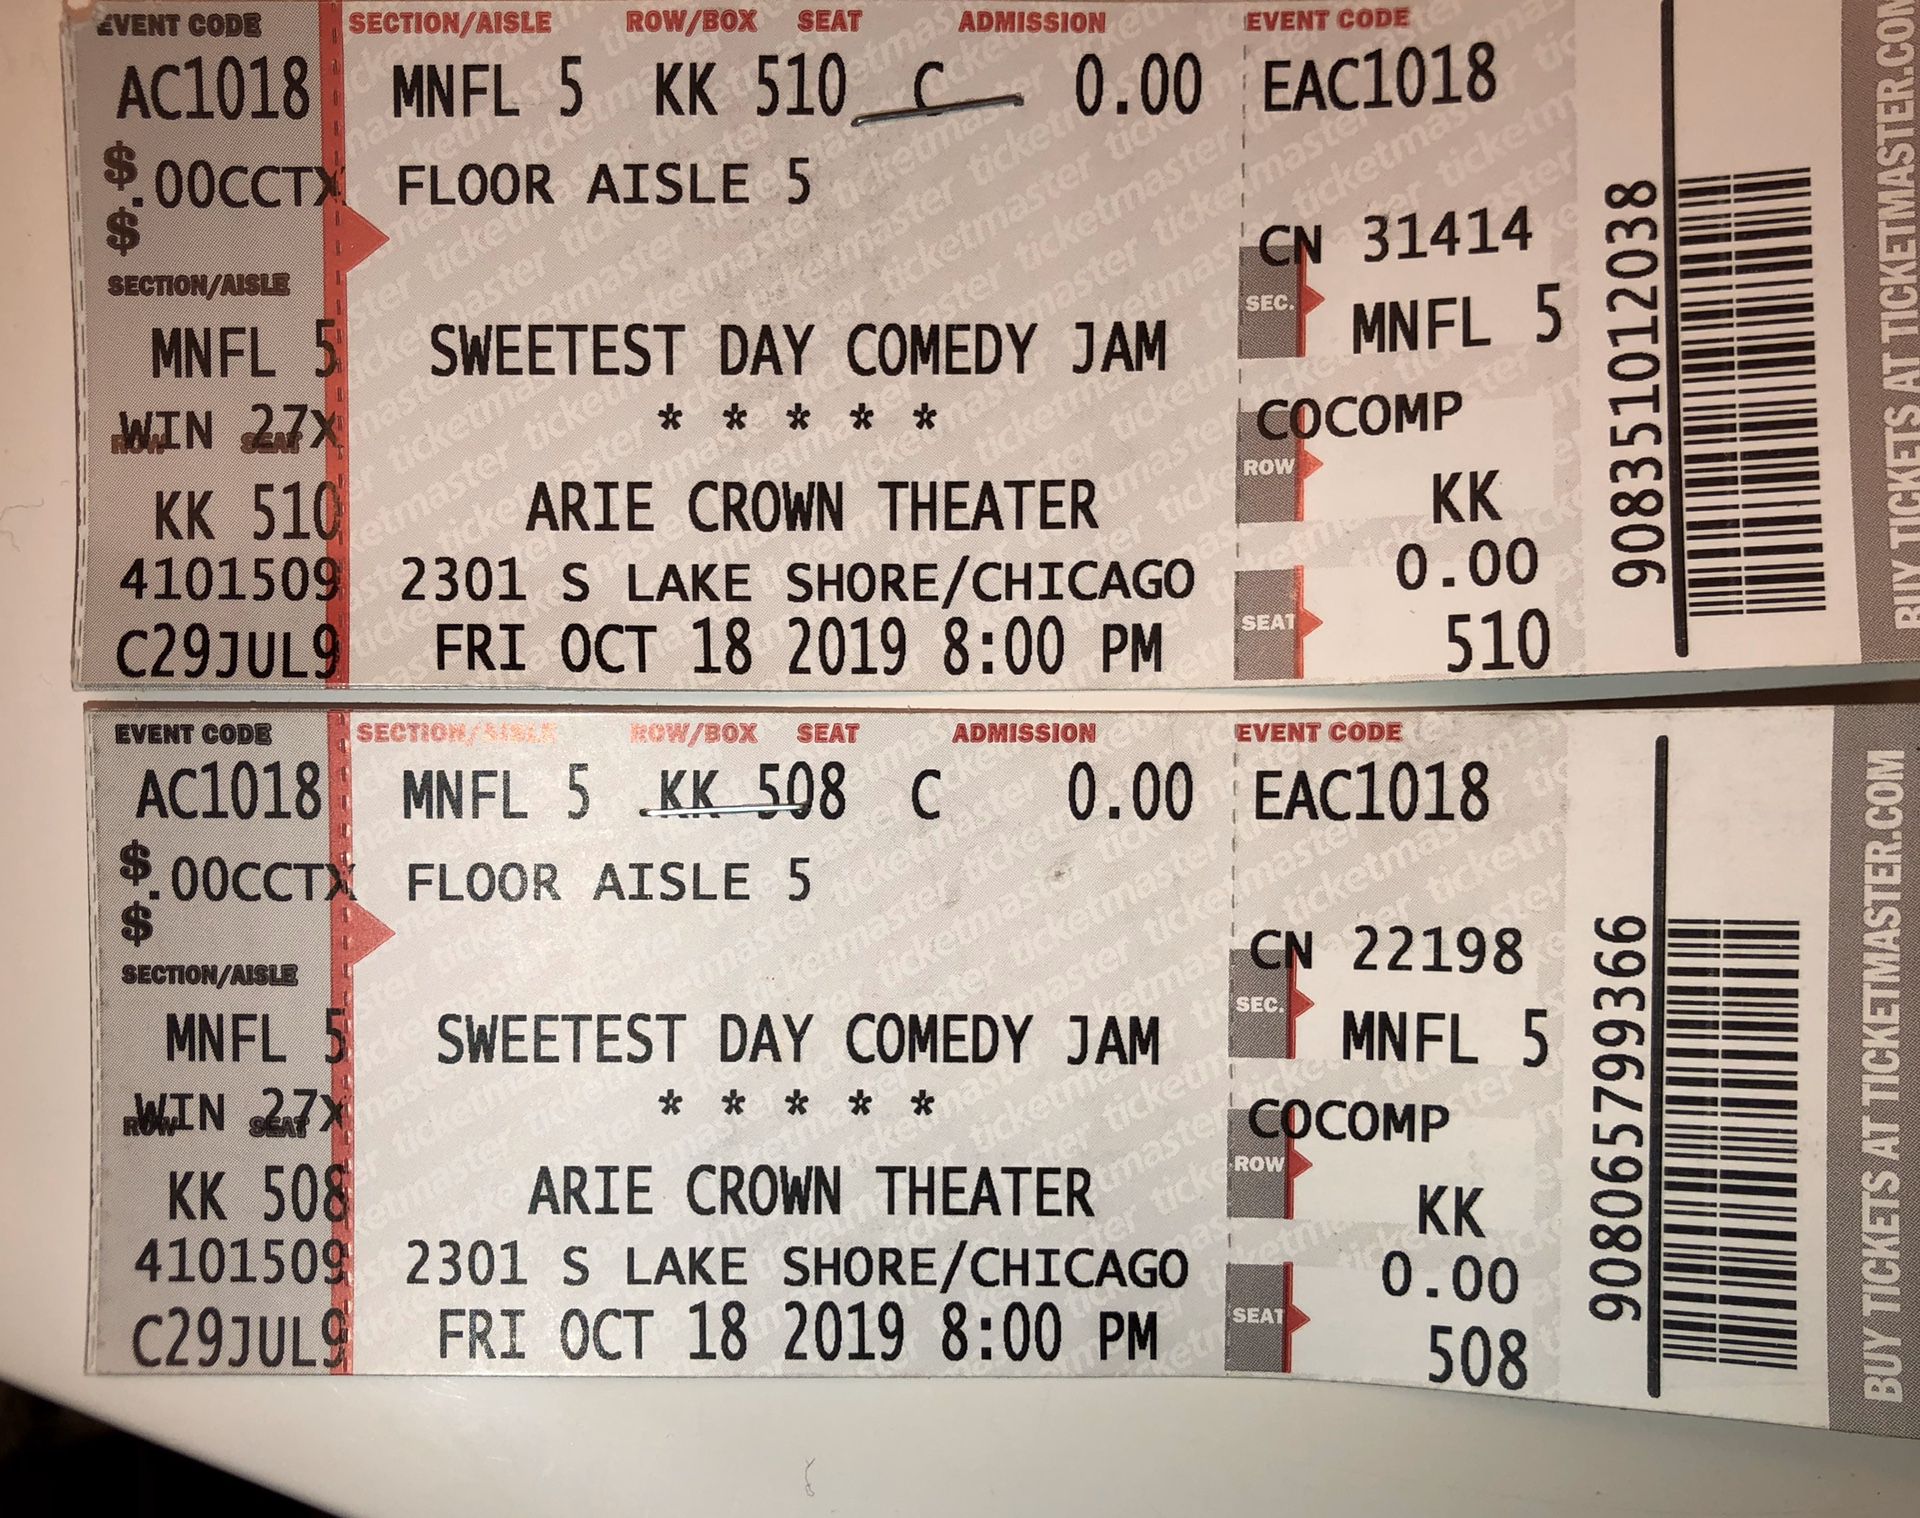 Sweetest Day Comedy Jam (Friday show)